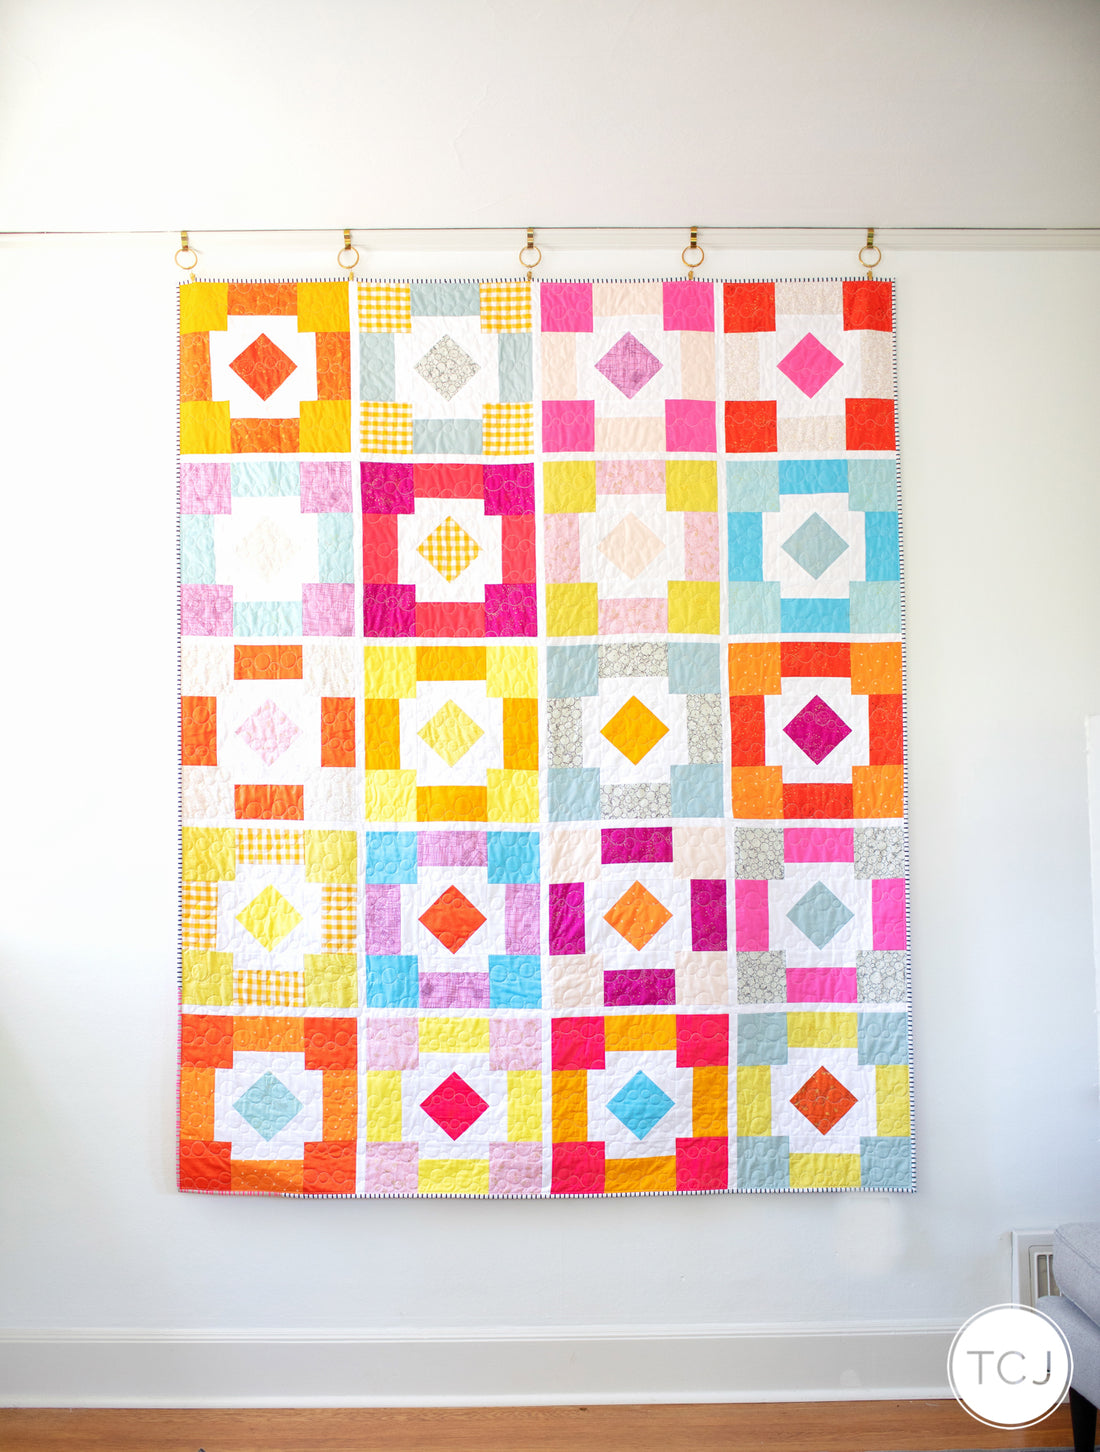 Backyard Party Quilt - the Bright One